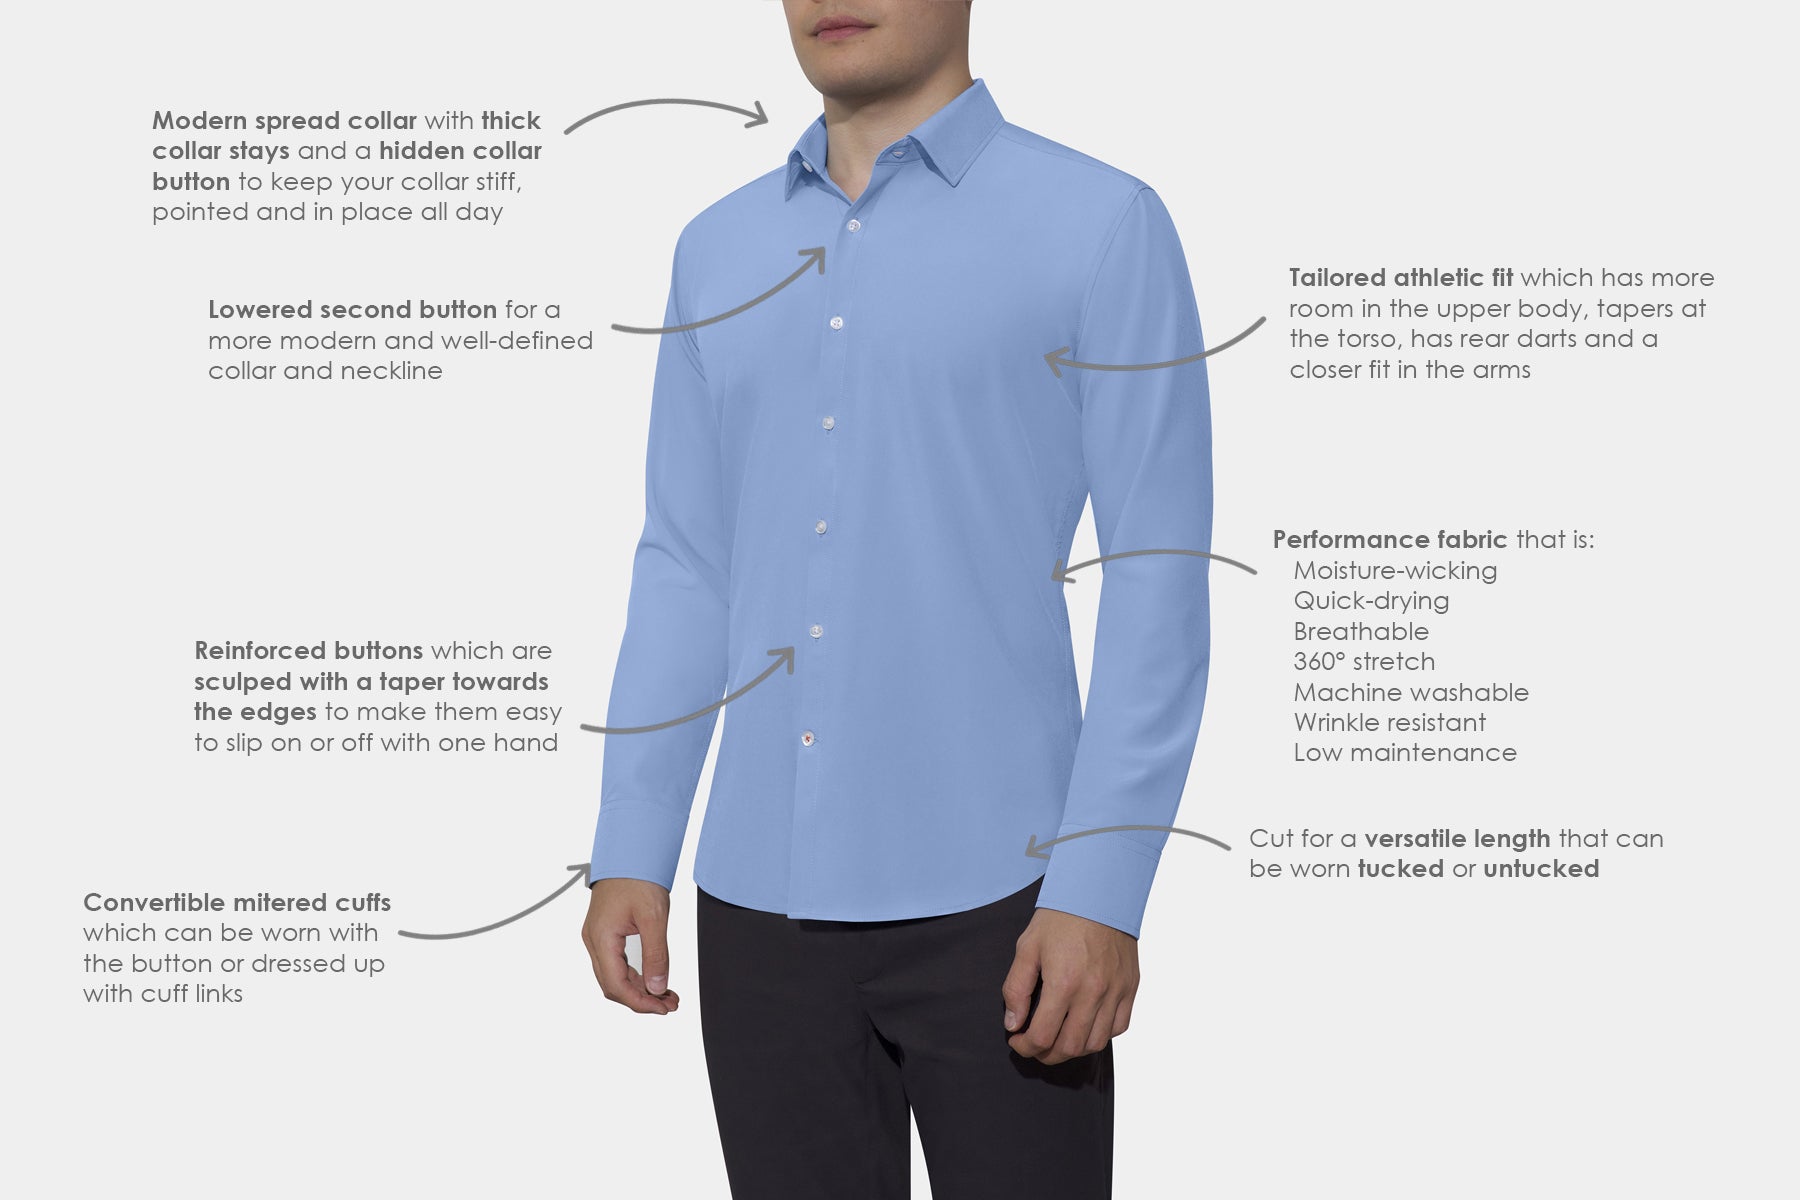 Benefits of Wrinkle-Resistant Shirts